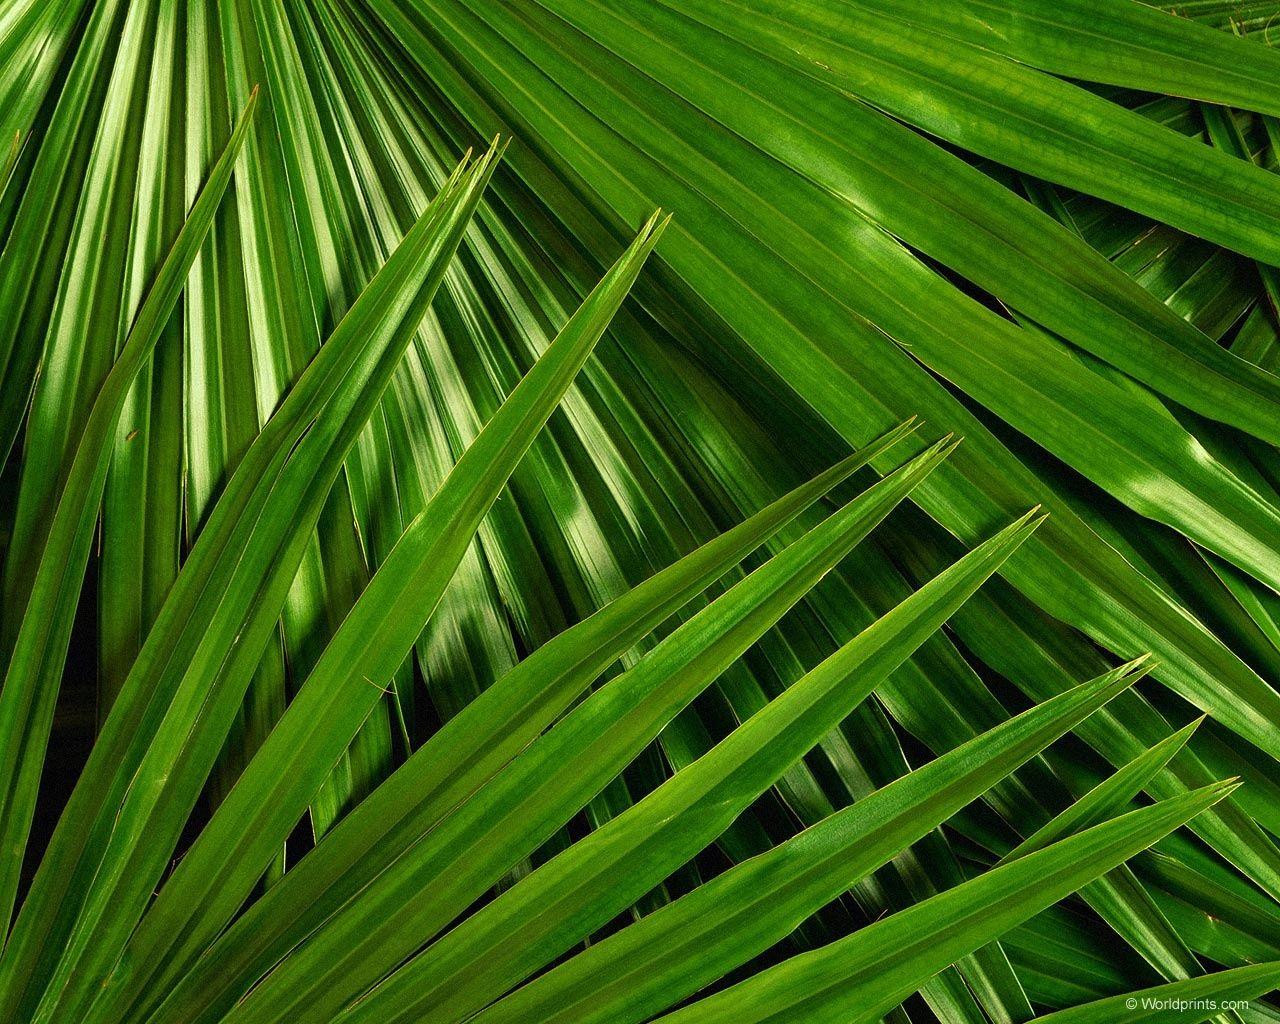 Adorable Palm Sunday Picture, Palm Sunday Wallpaper Background